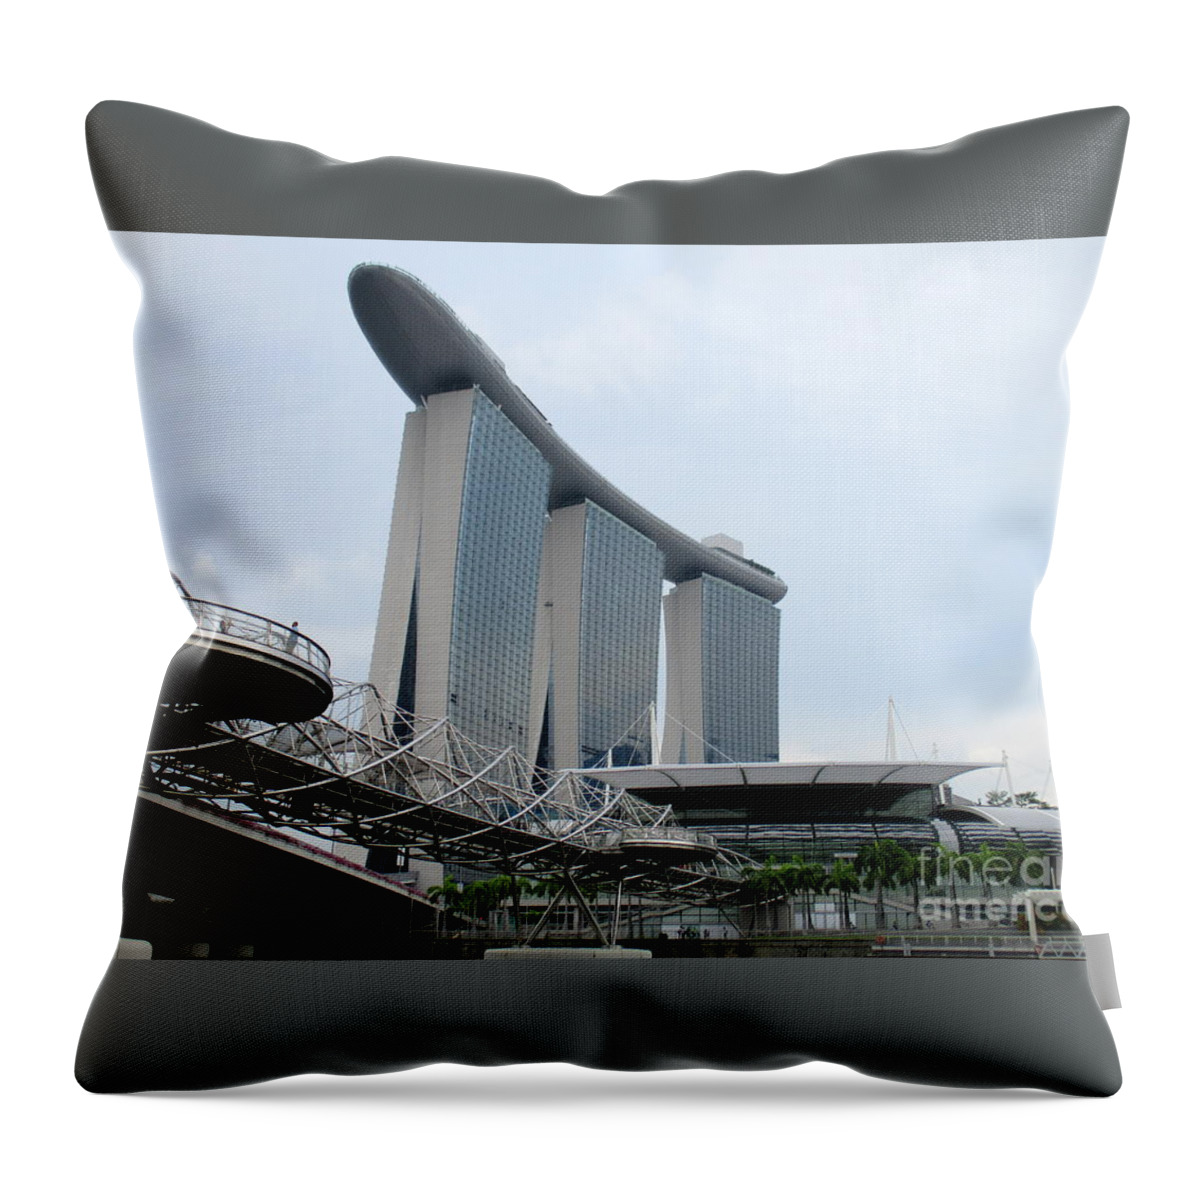 Moshie Safdie Throw Pillow featuring the photograph Marina Bay Sands 13 by Randall Weidner